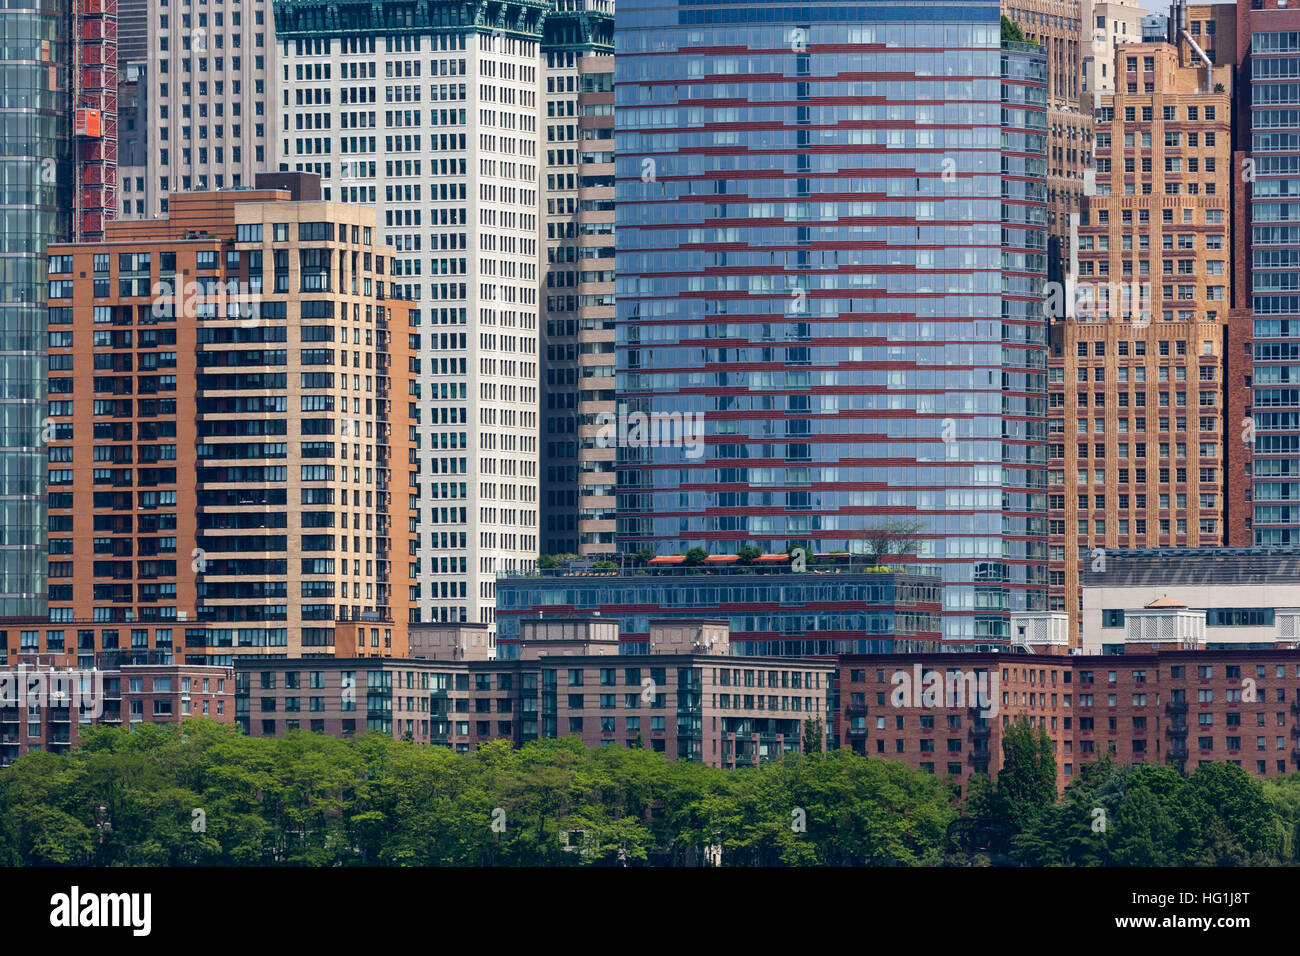 Windows and the patterns they form are seen on buildings facing the Hudson River in Lower Manhattan. Stock Photo